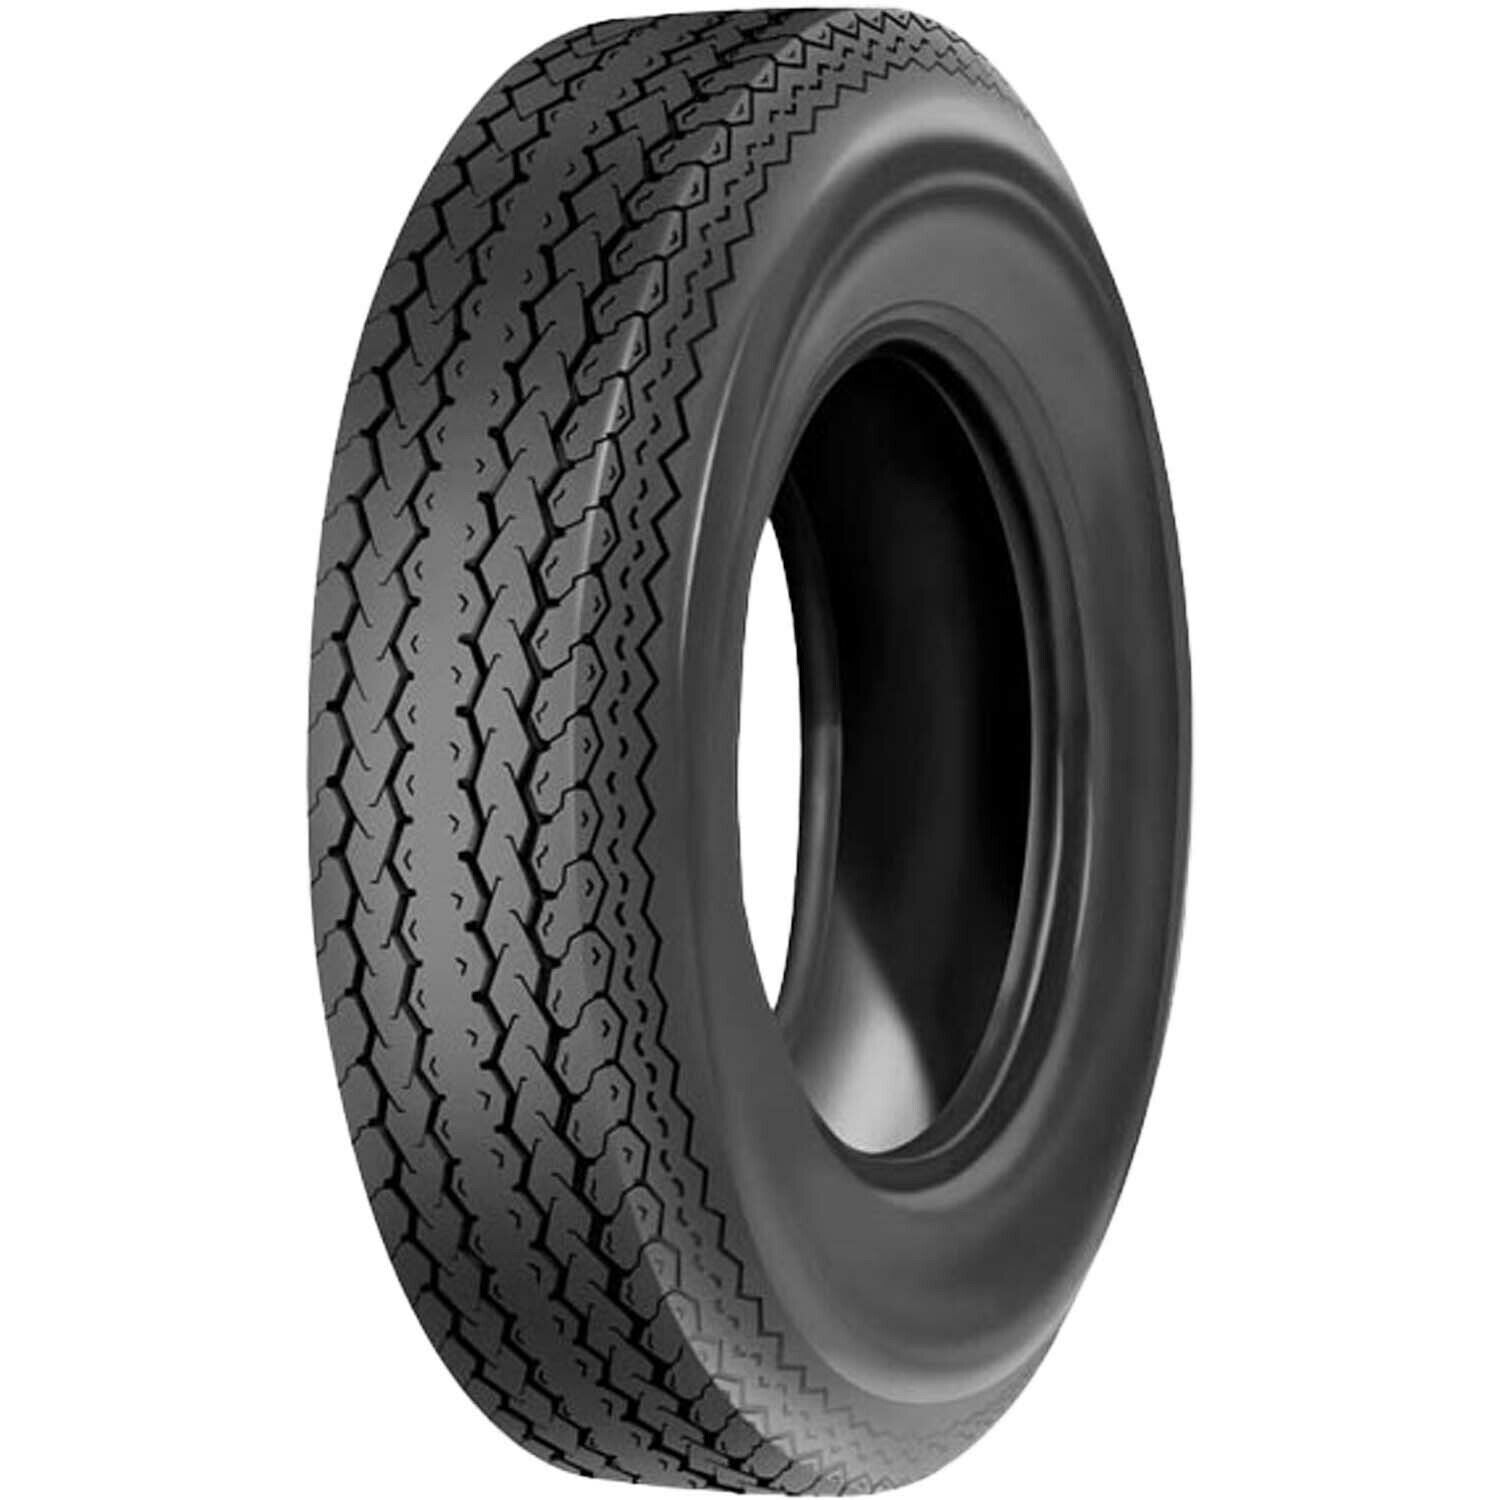 Greenball Towmaster ST S378 Trailer Tire LRC 6ply 5.30-12